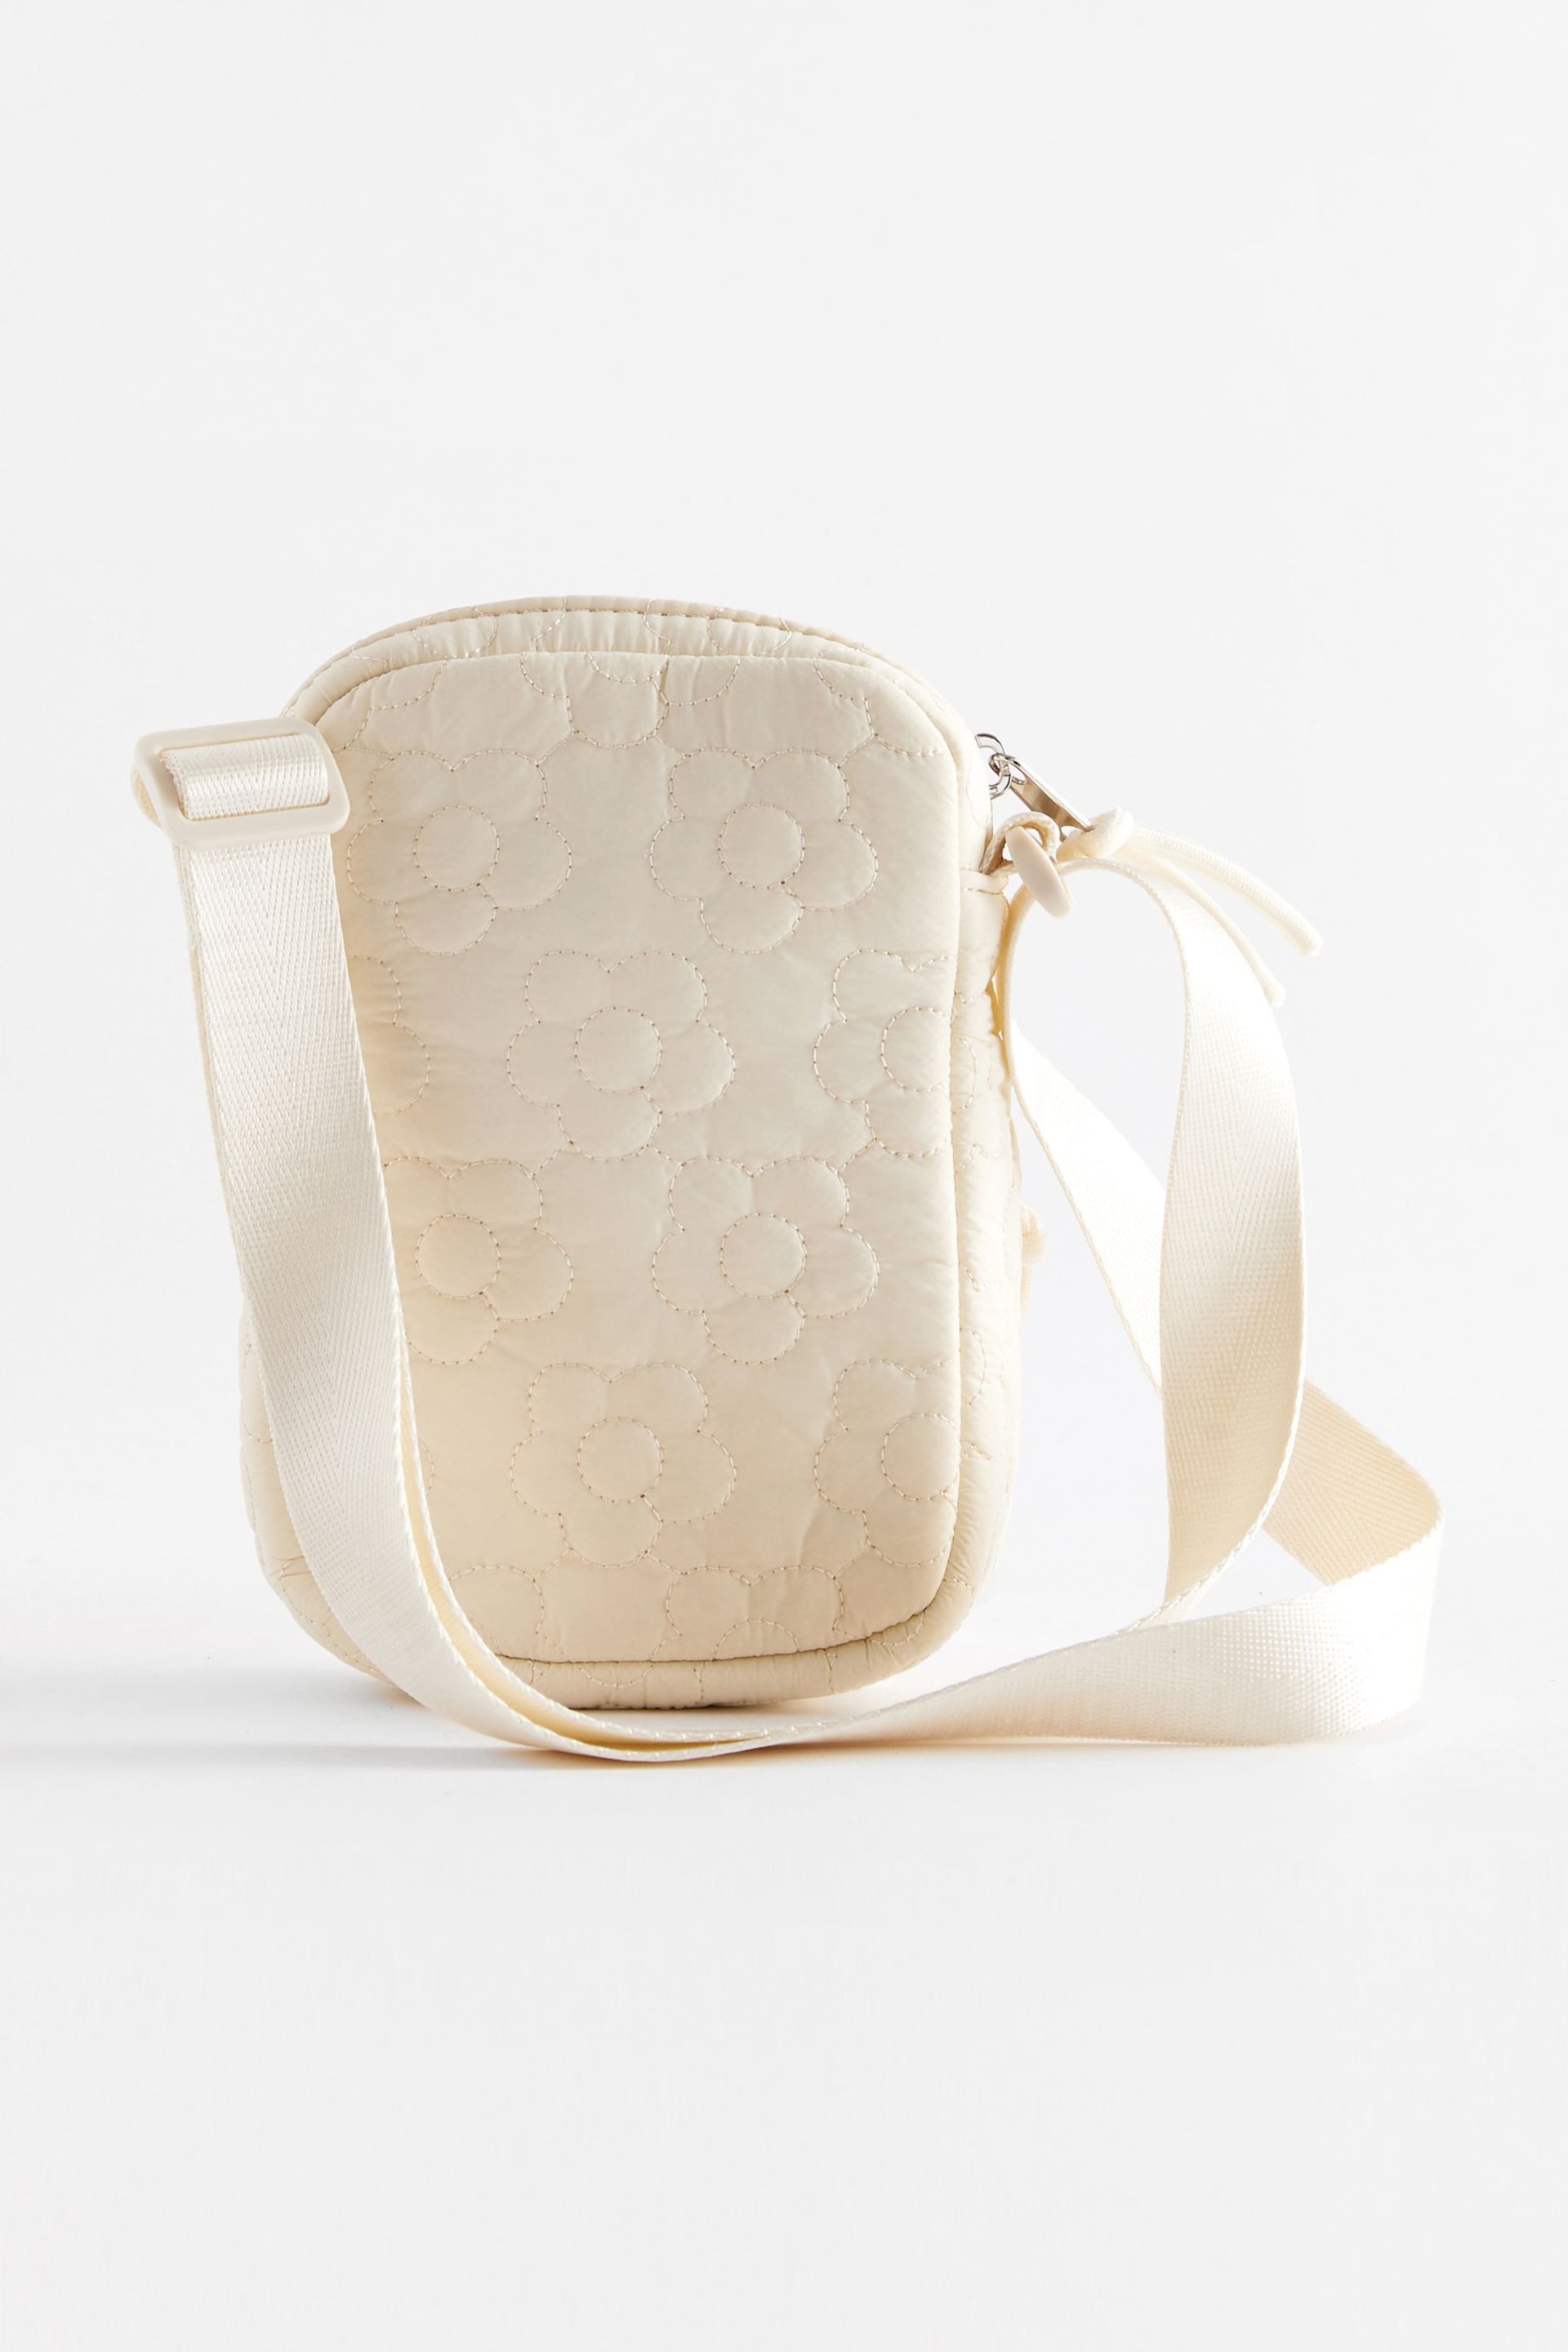 Cream Daisy Quilted Cross-Body Bag - Image 2 of 4